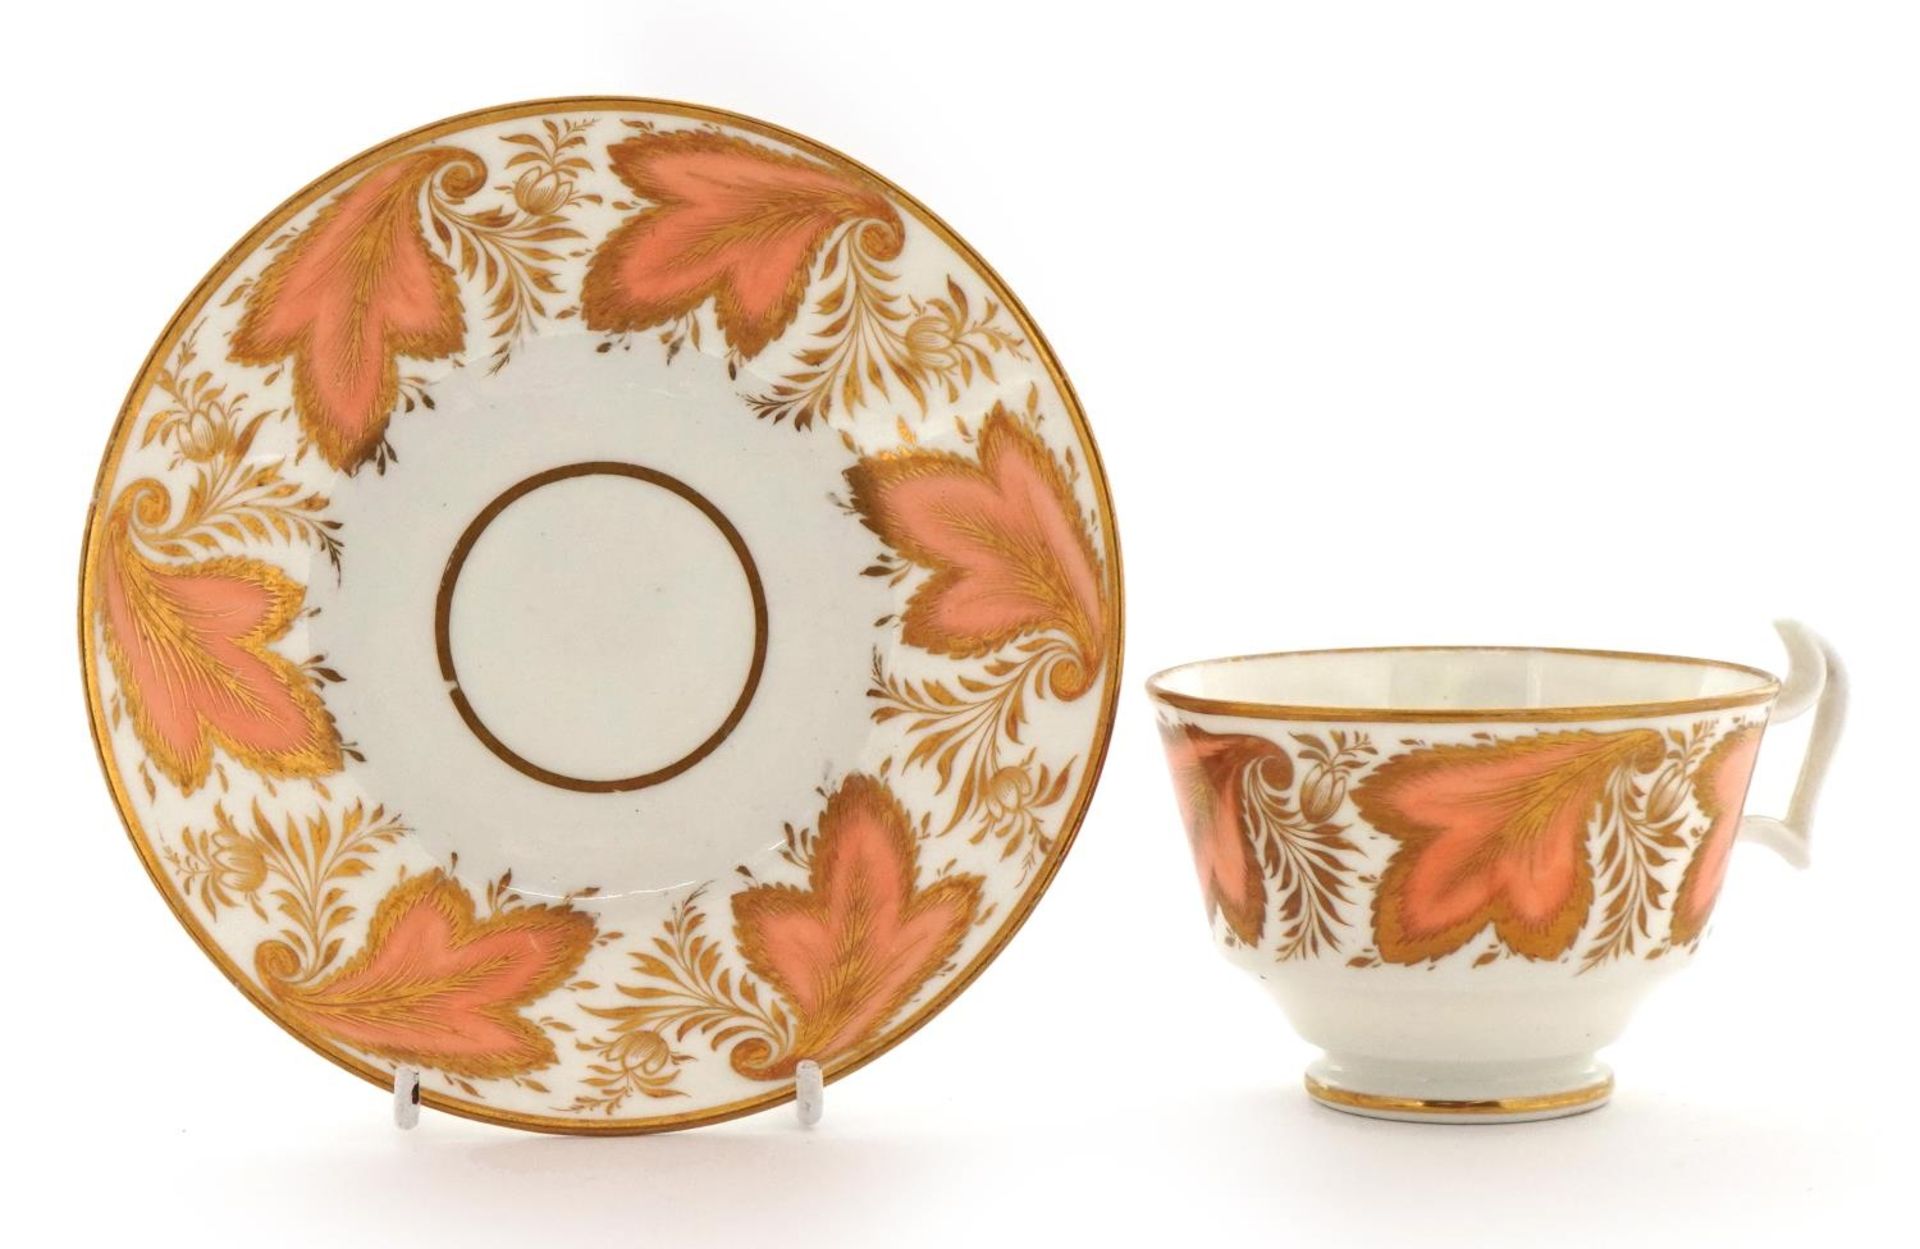 Early 19th century Swansea porcelain cup and saucer, the cup 6cm high